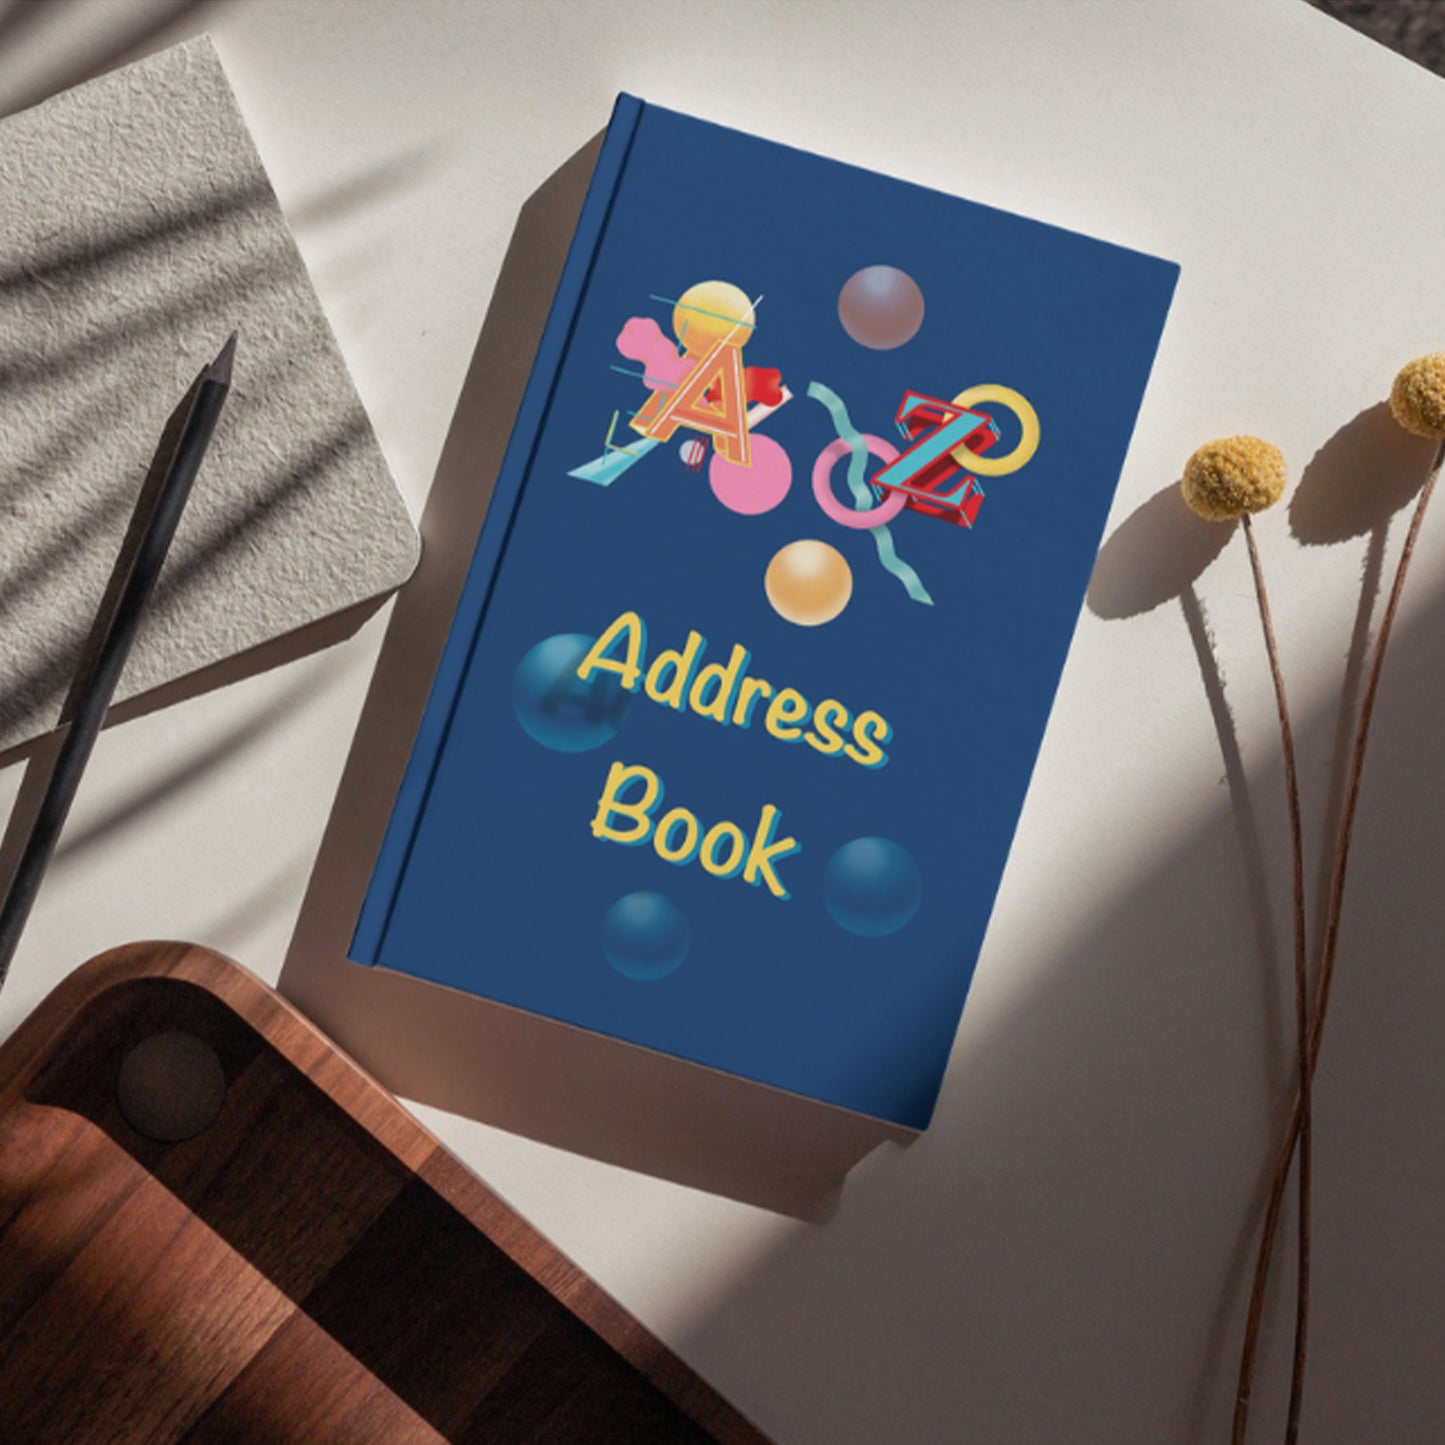 A to Z Address Book / Hardcover